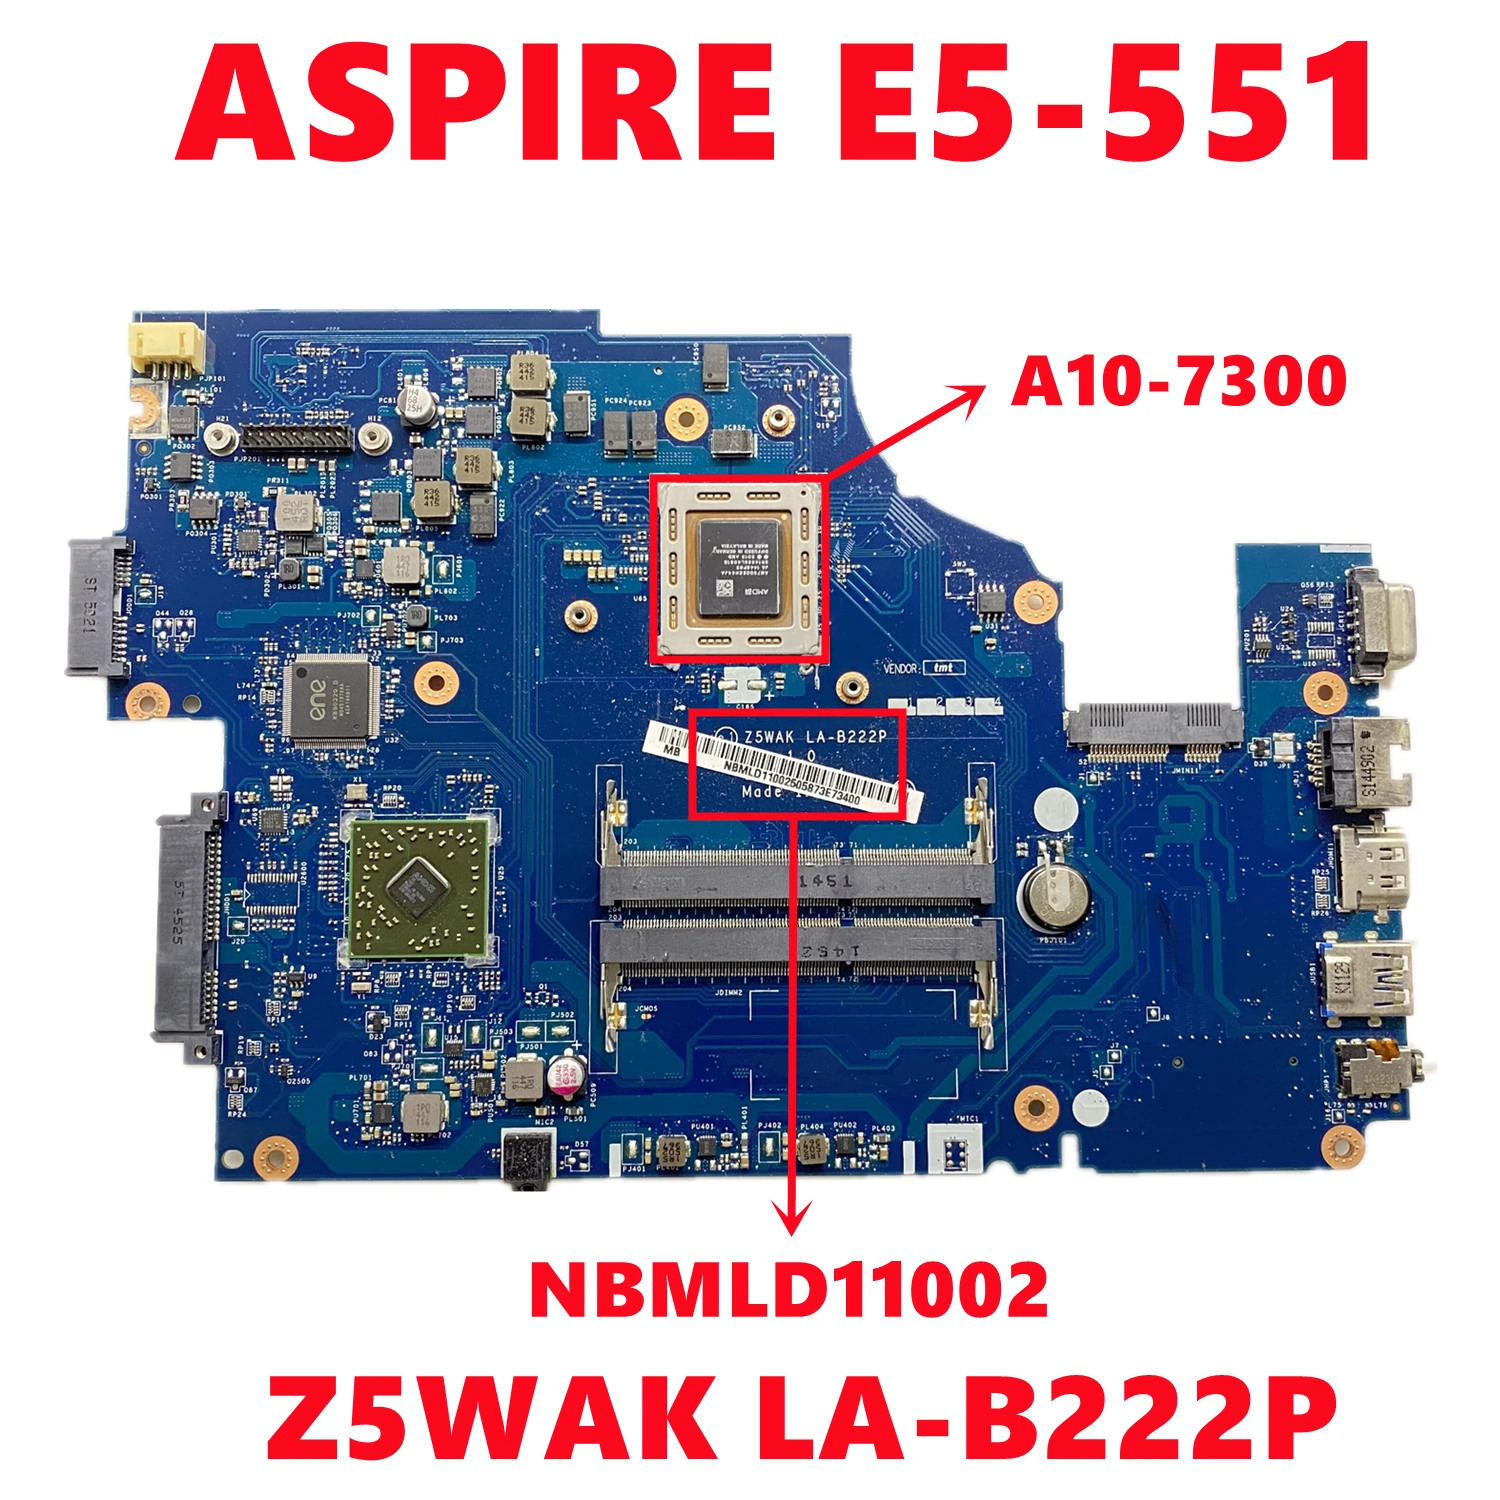 

NBMLD11002 NB.MLD11.002 For Acer ASPIRE E5-551 Laptop Motherboard Z5WAK LA-B222P With AMD A10-7300 CPU DDR3L 100% Tested OK